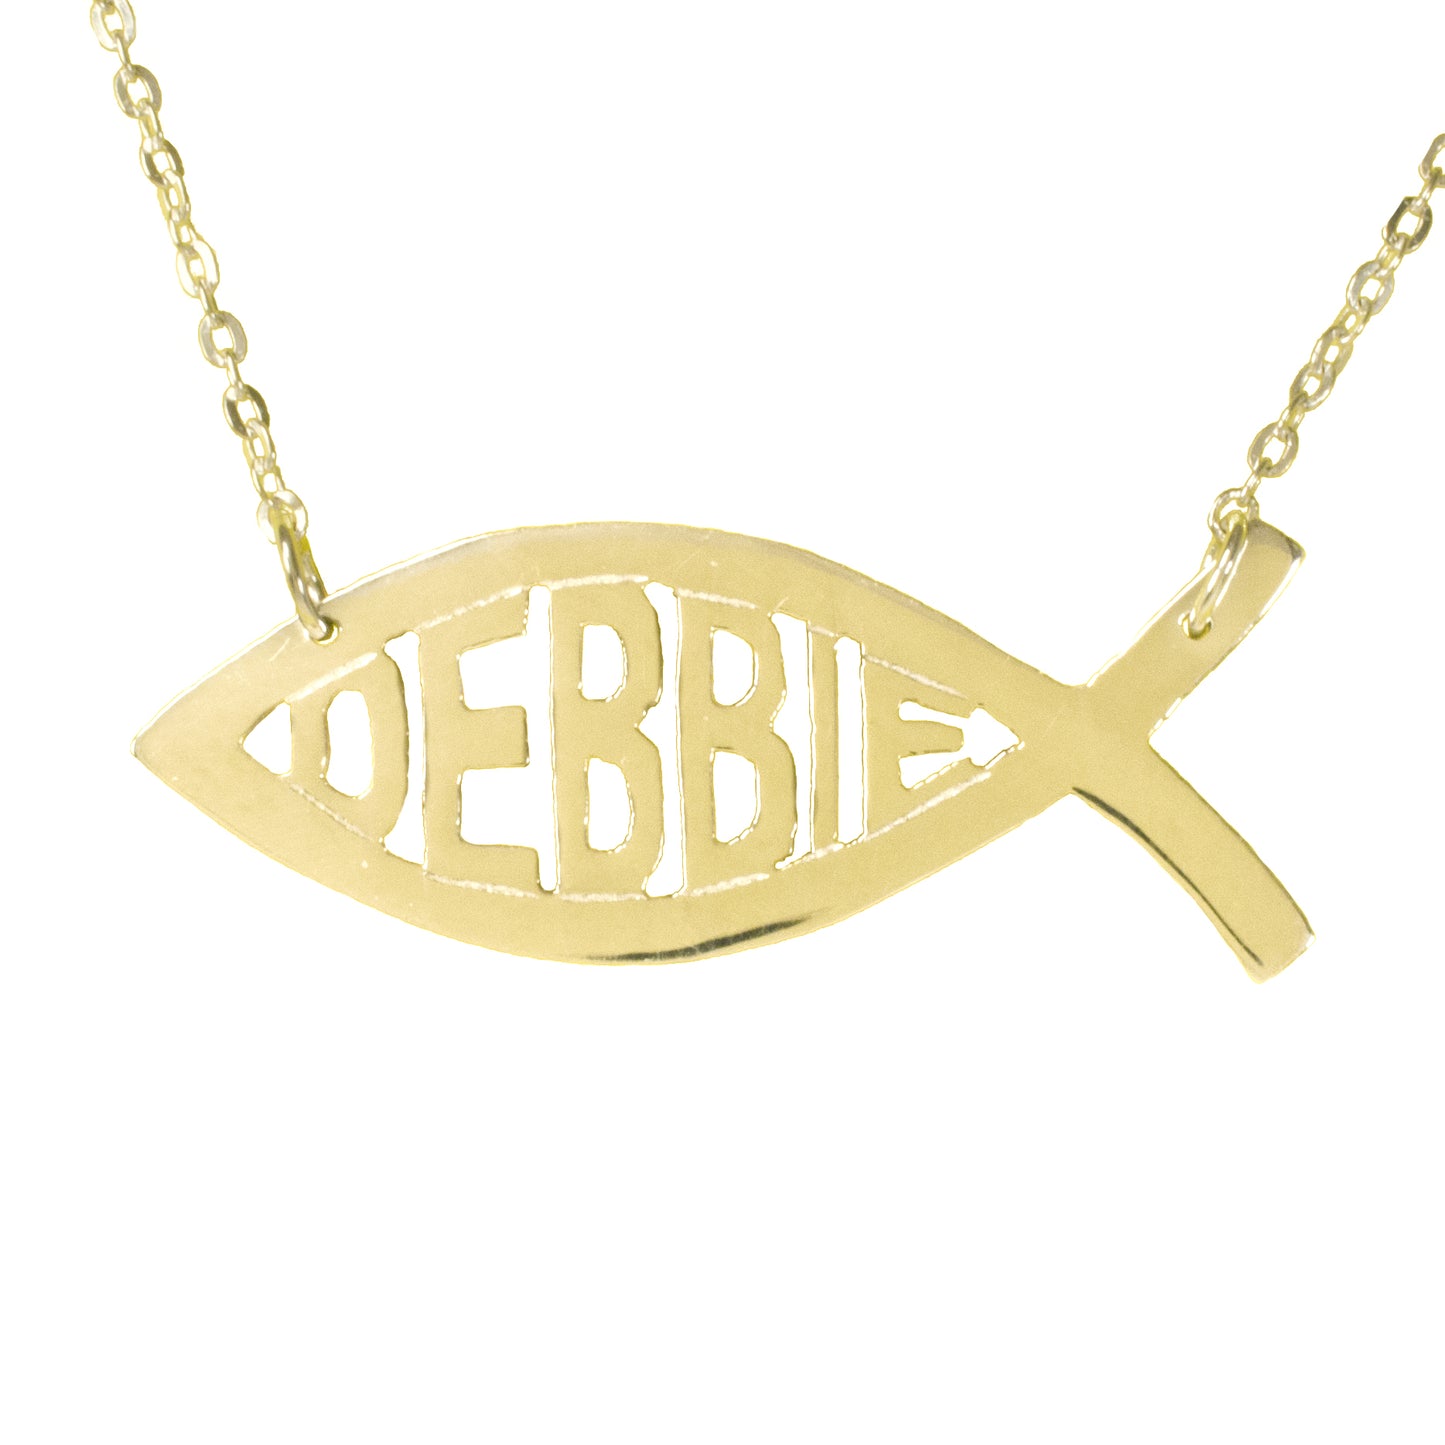 Ichthus Name Necklace